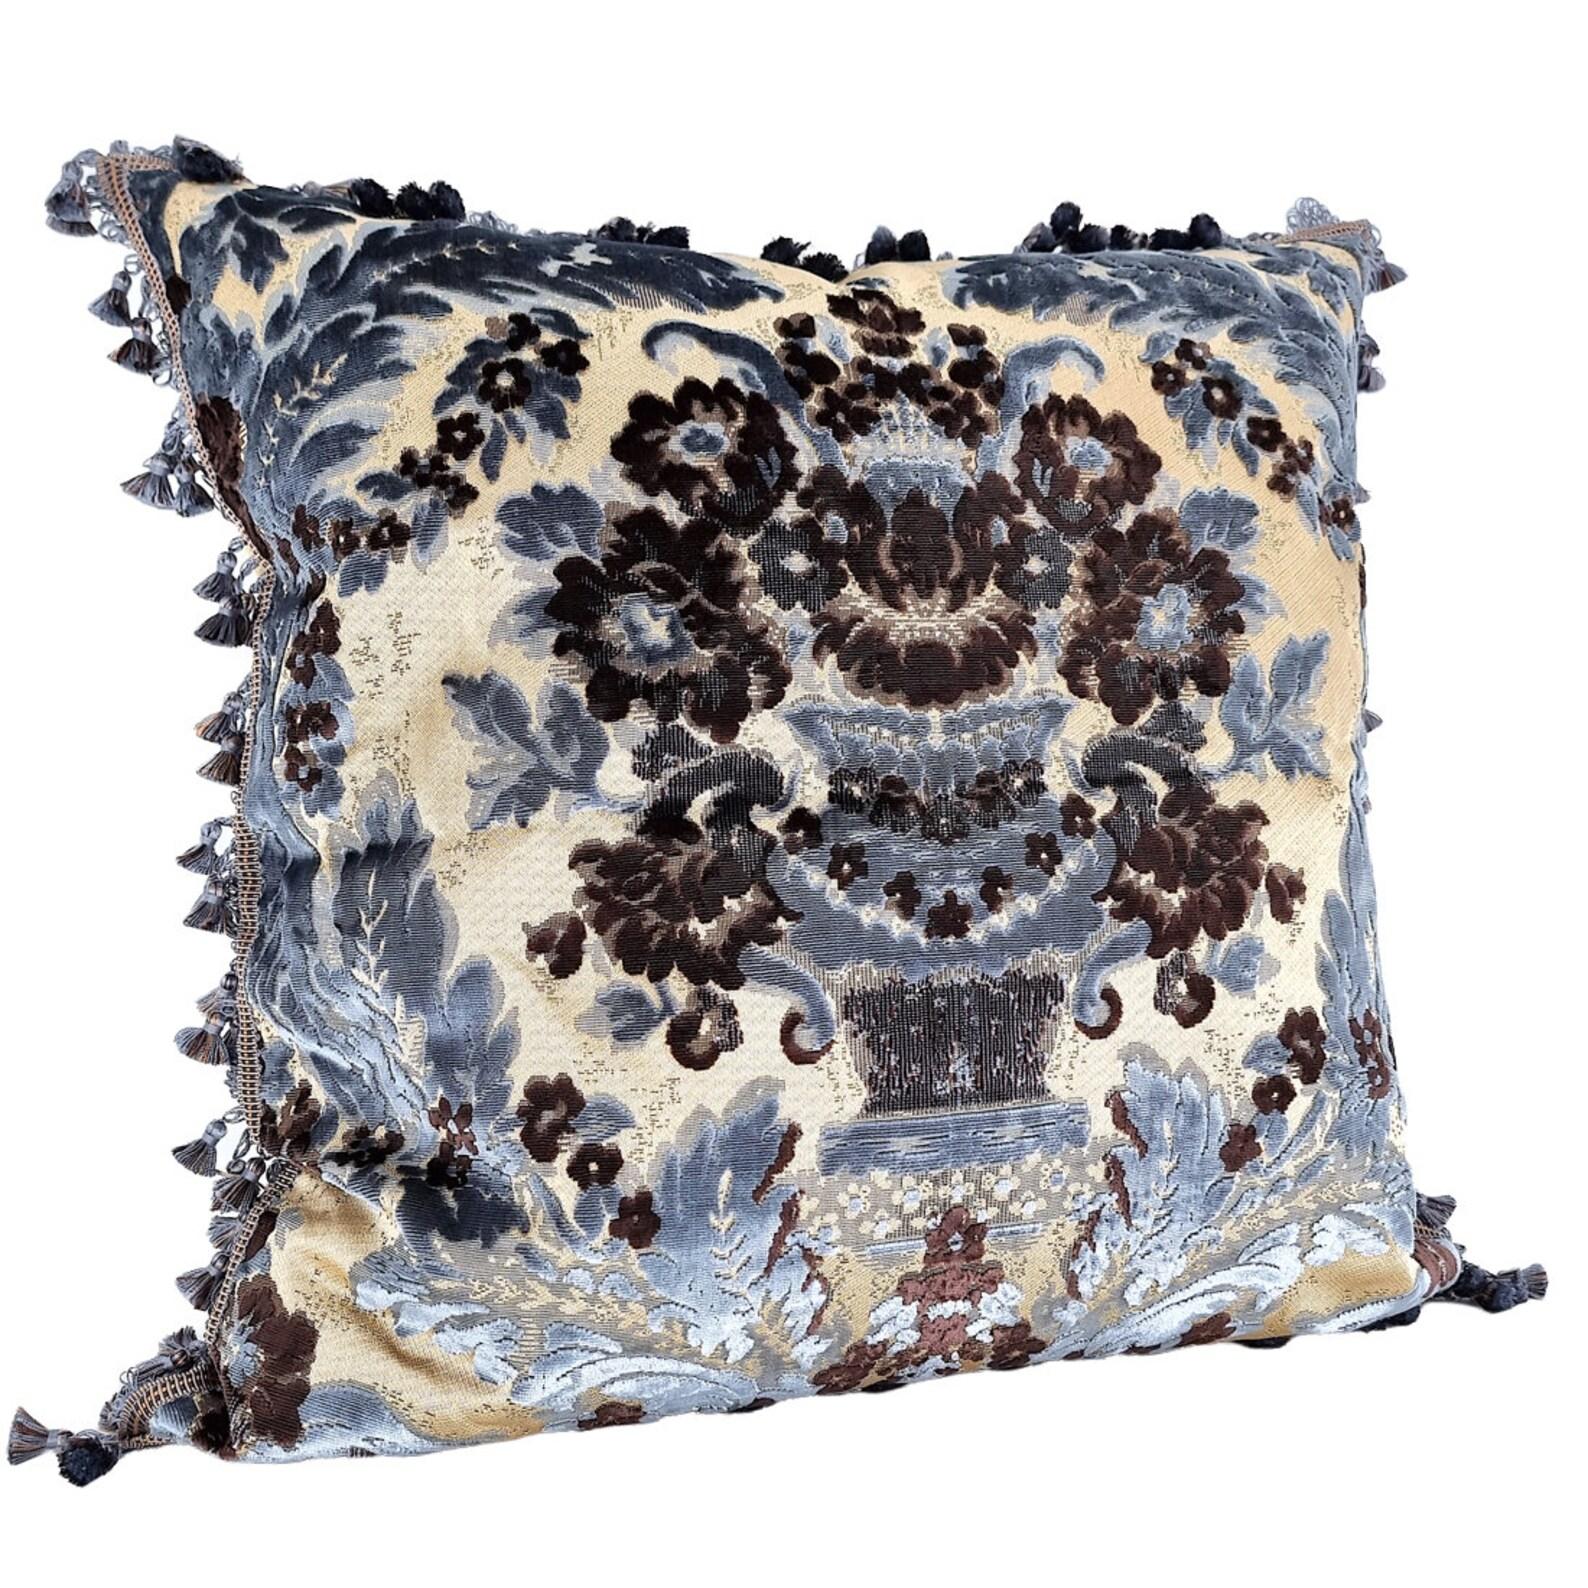 This amazing decorative throw pillow is handmade using the iconic 